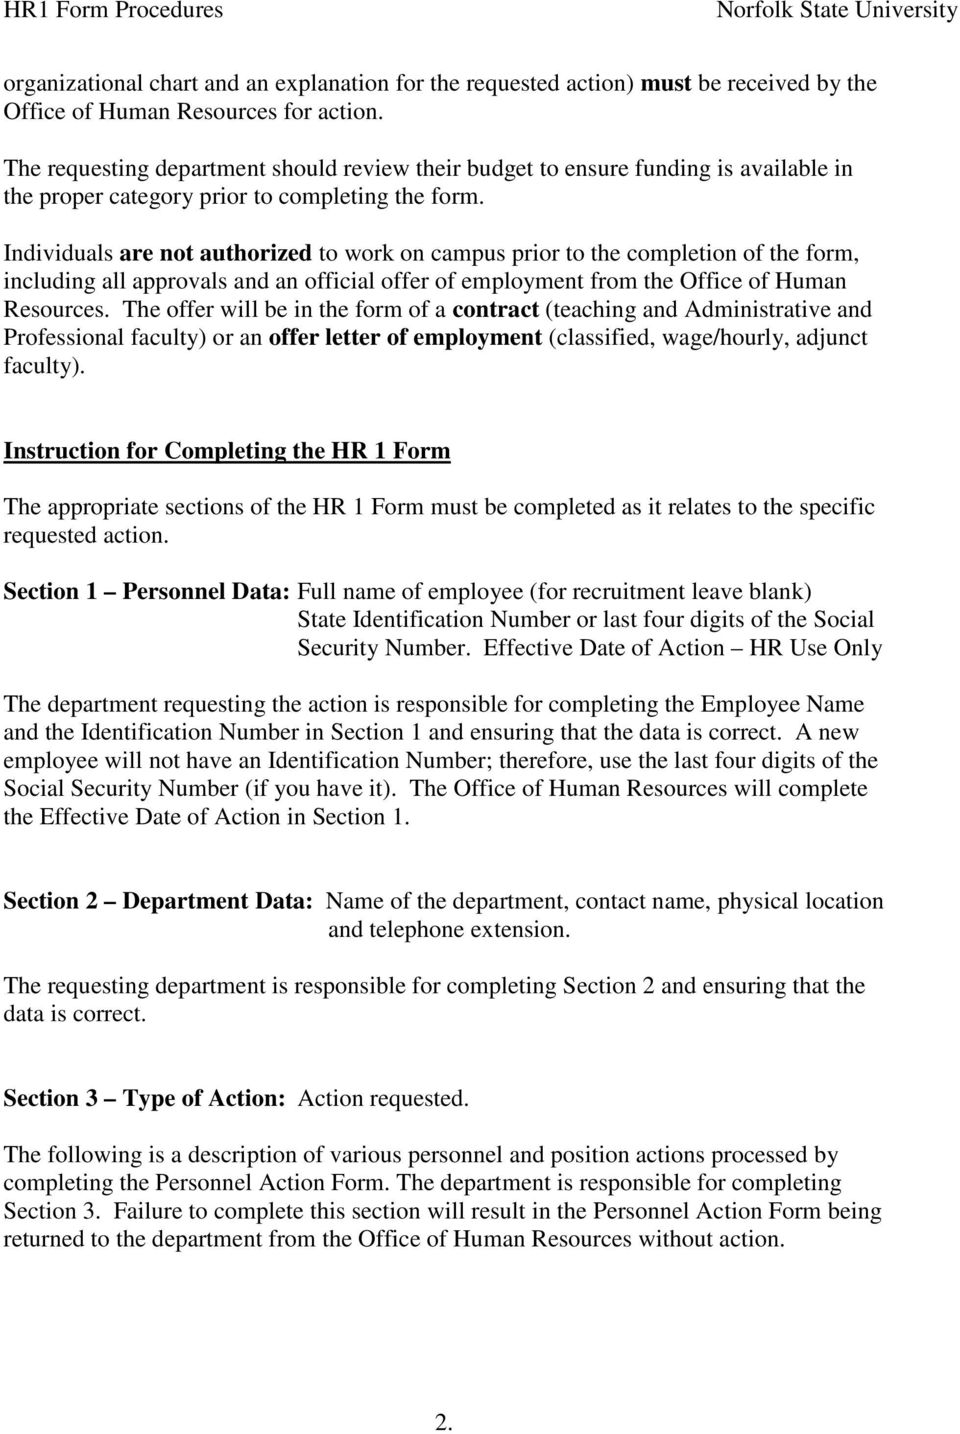 Individuals are not authorized to work on campus prior to the completion of the form, including all approvals and an official offer of employment from the Office of Human Resources.